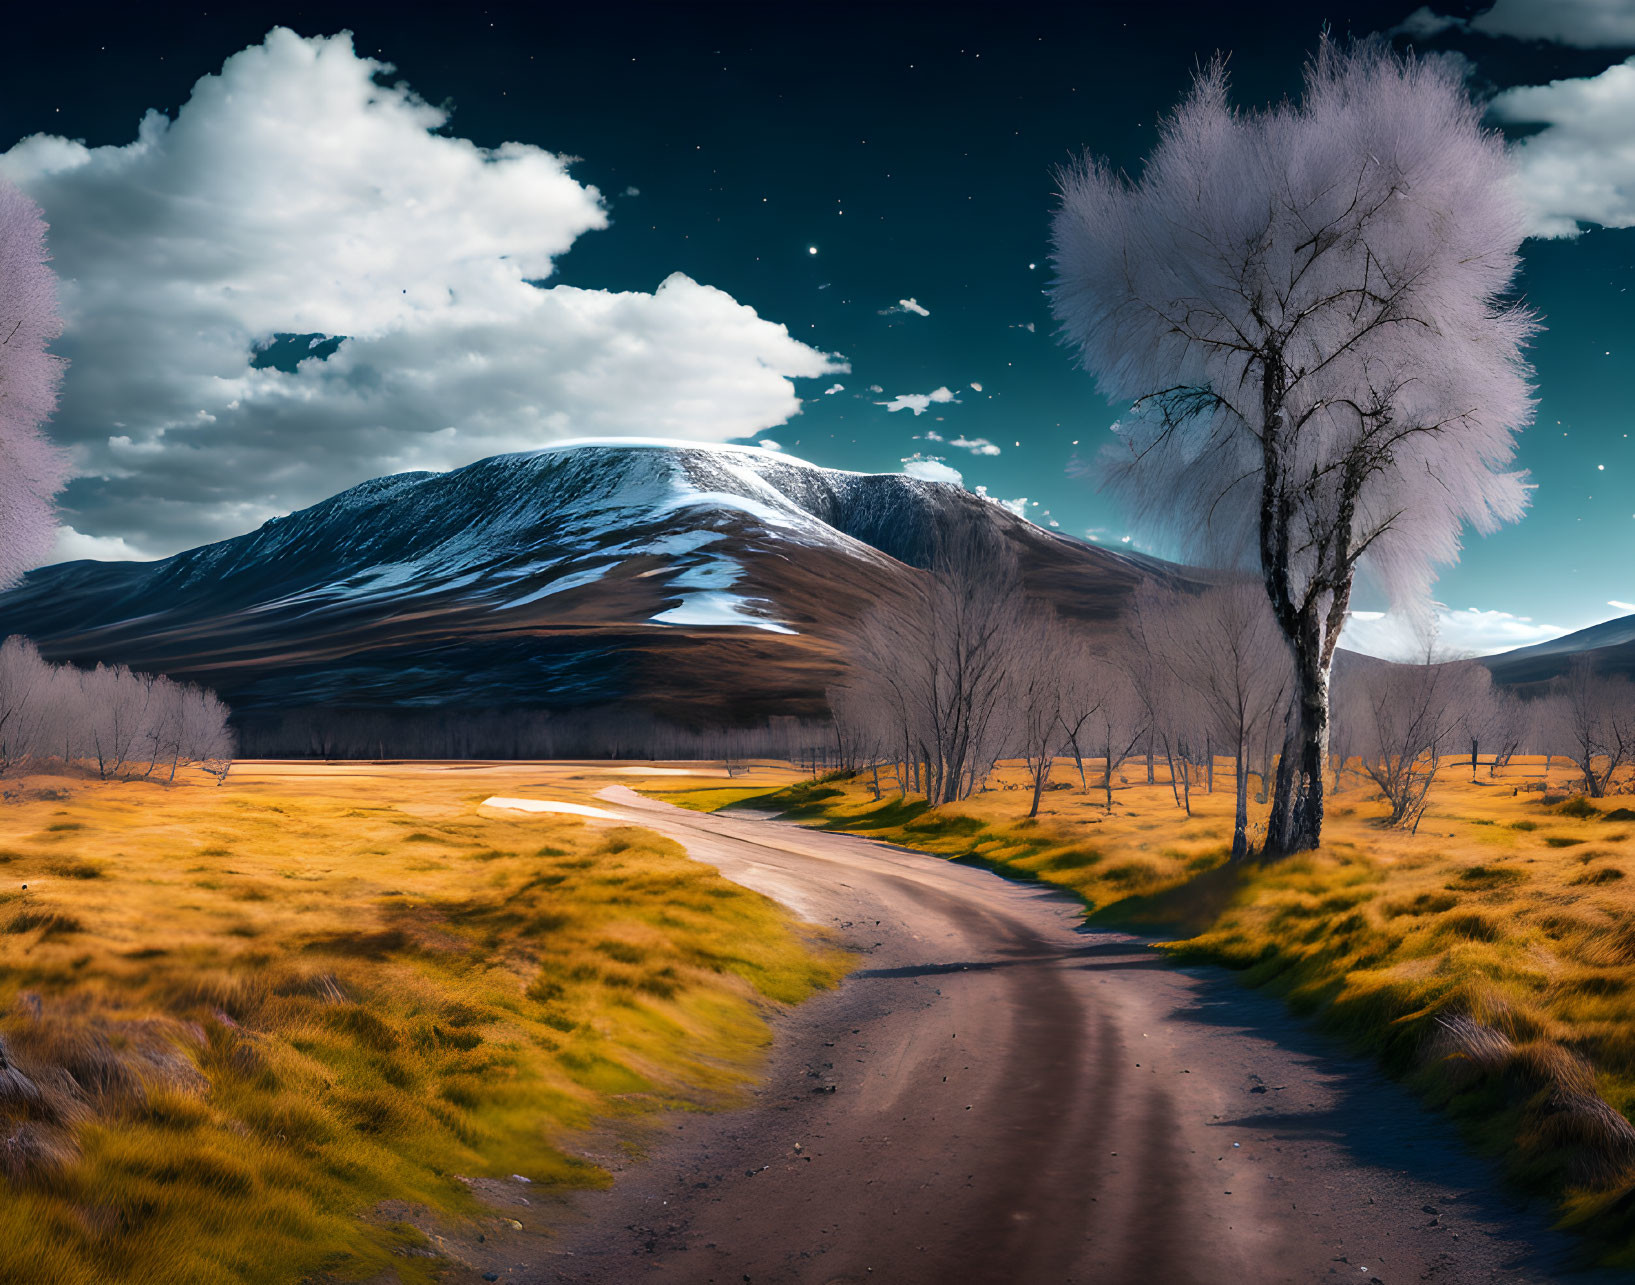 Scenic dirt road through golden field to snow-capped mountain at twilight